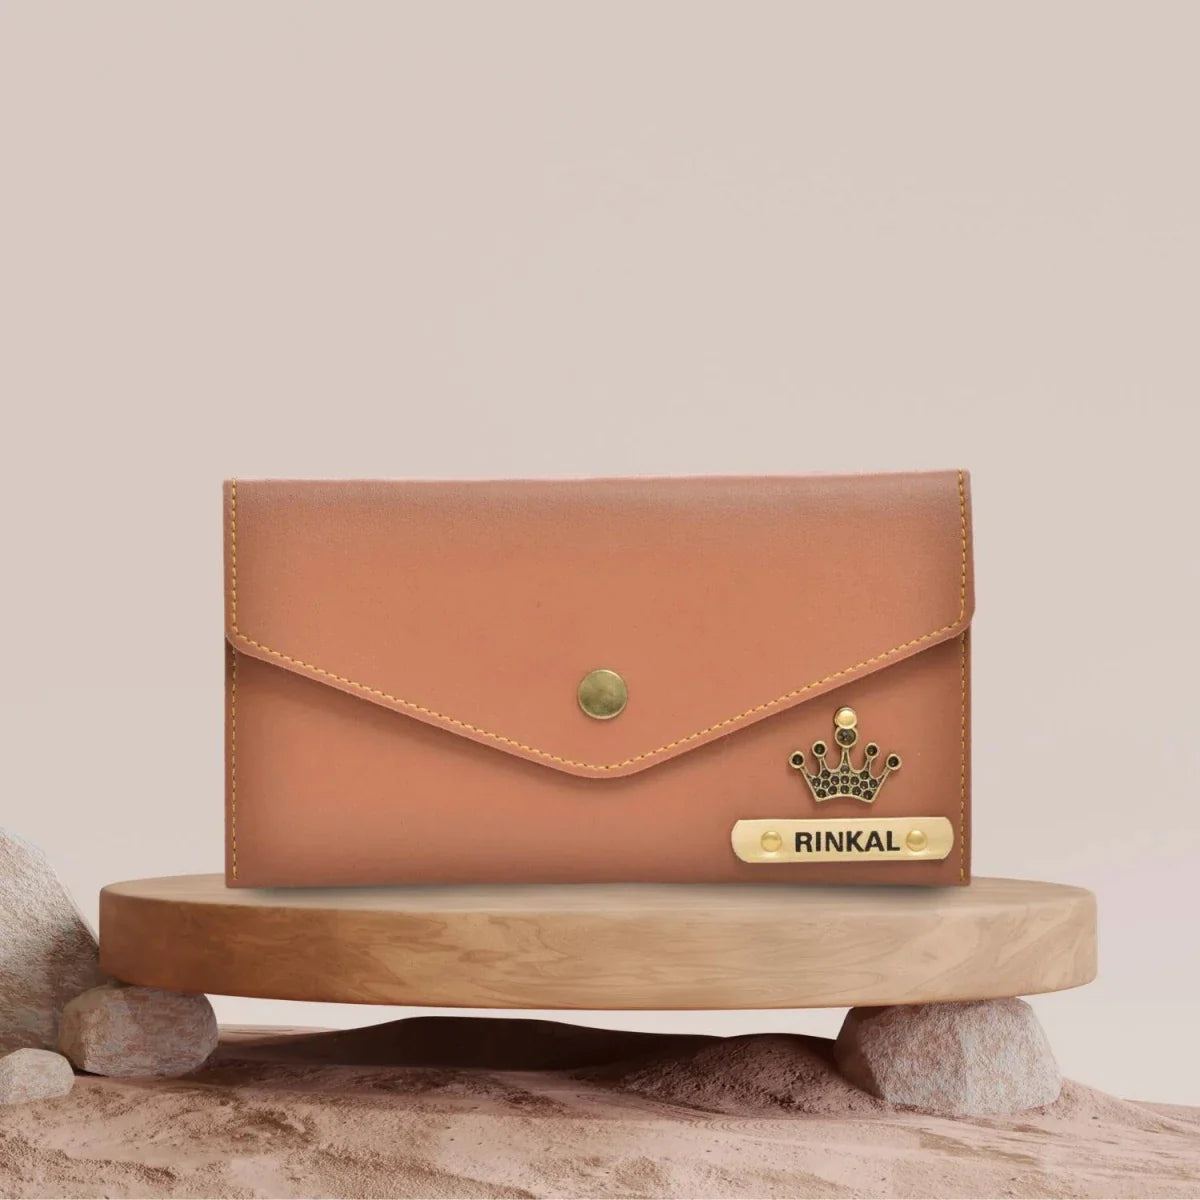 Personalized Premium Leather Mini Clutch With Name